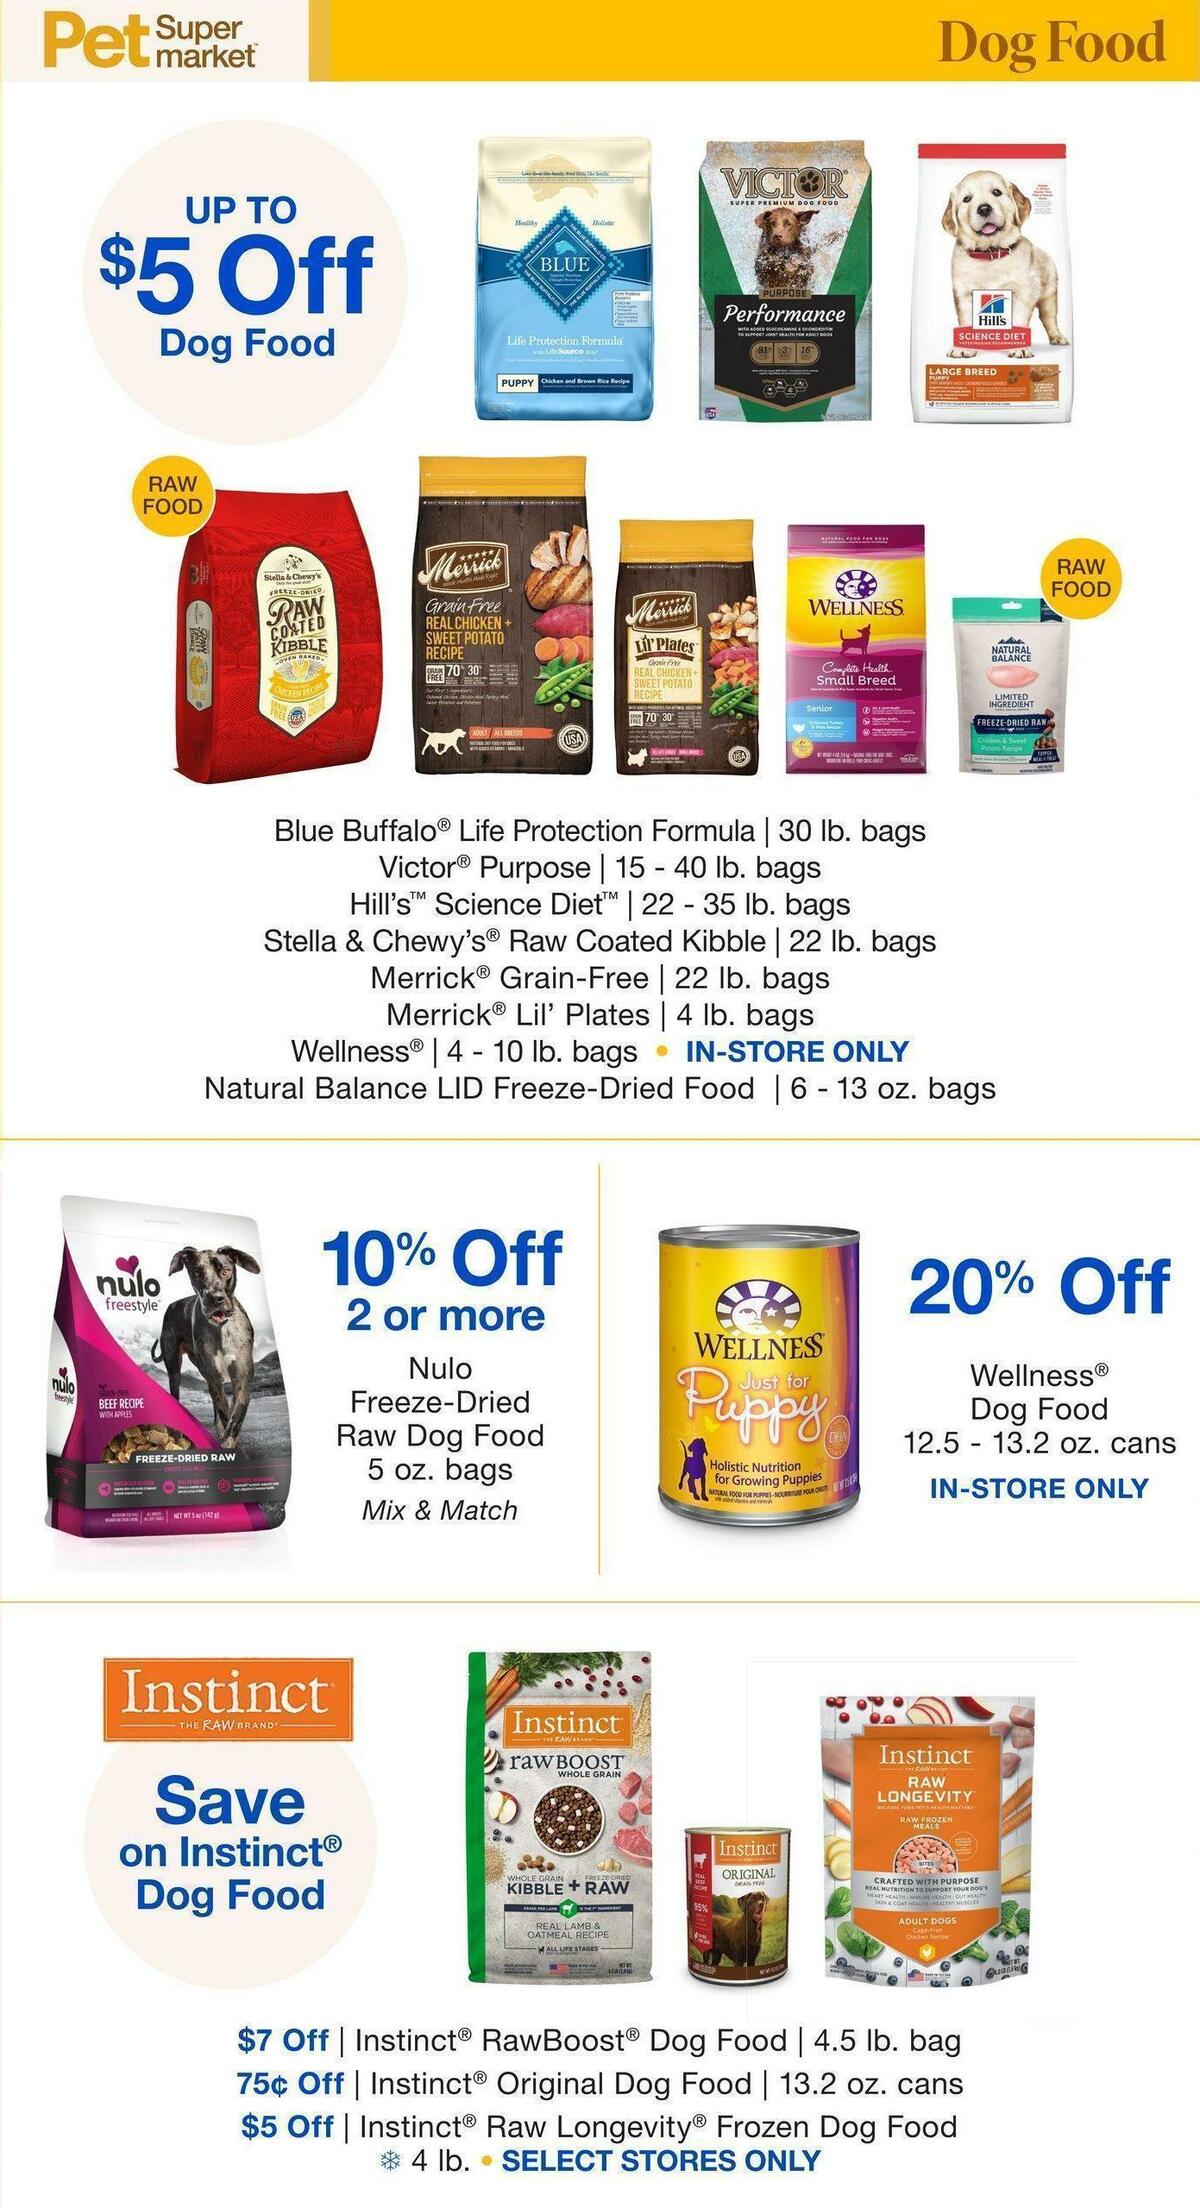 Pet Supermarket Small Animal Specials Weekly Ad from September 1